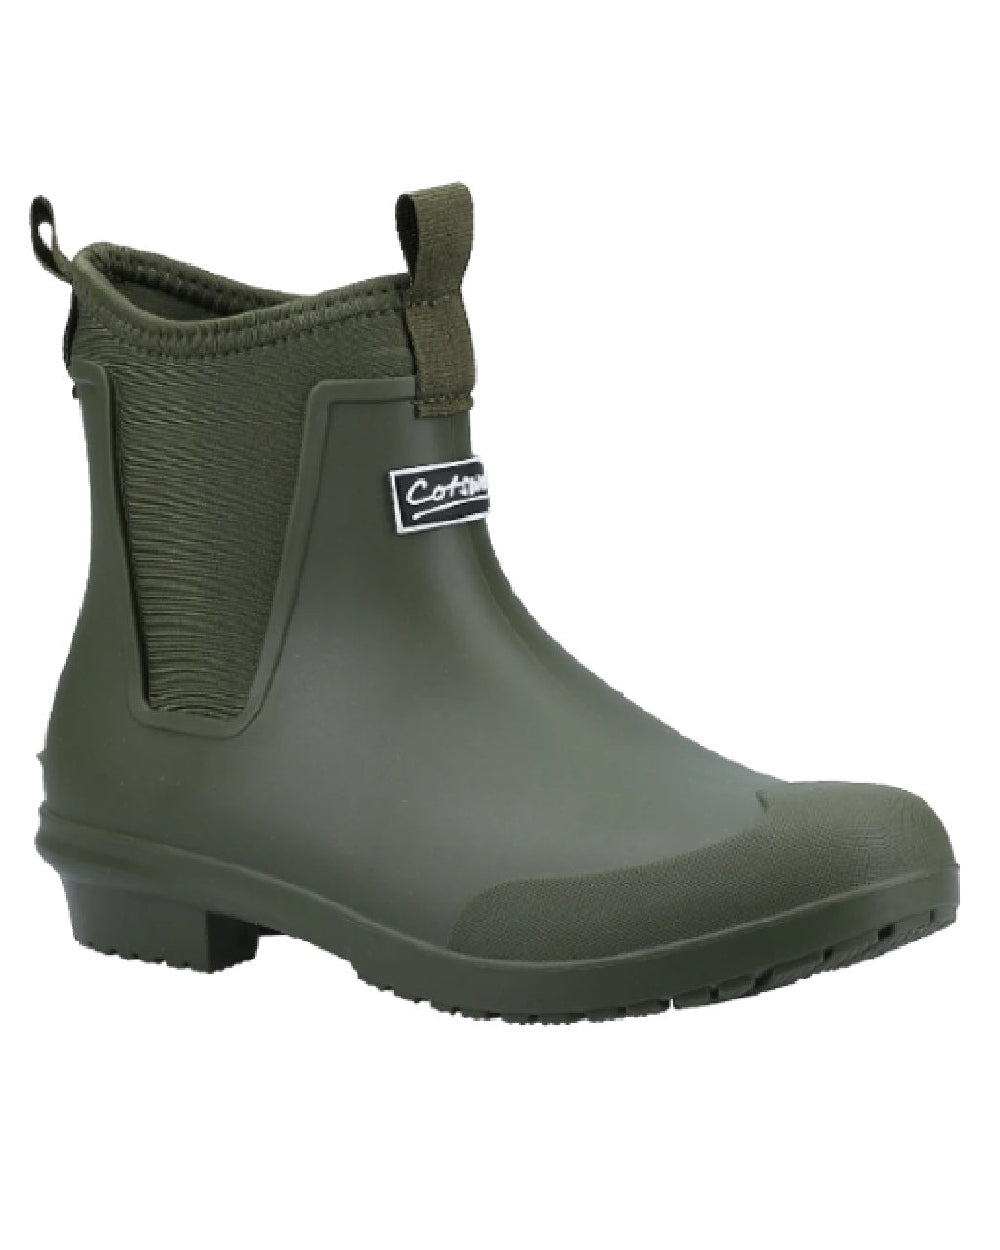 Green coloured Cotswold Grosvenor Wellington Boots on white background 